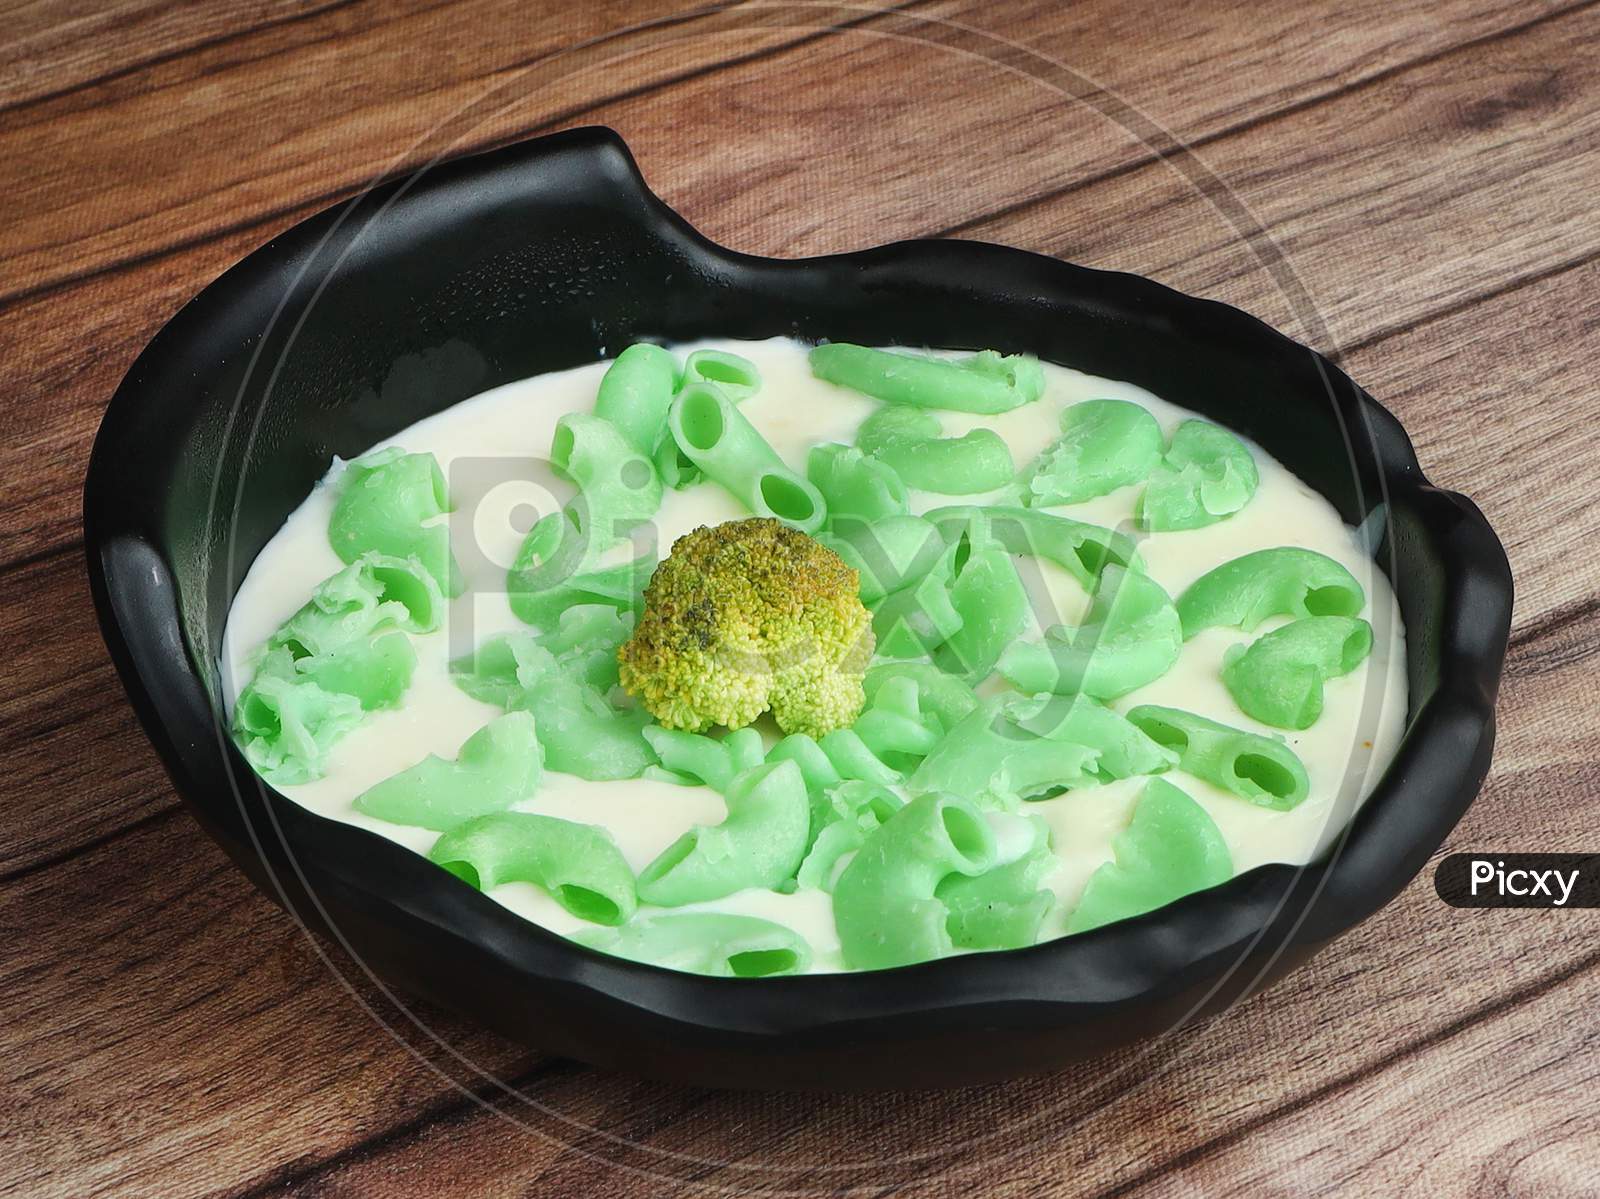 Green Lantern Pasta Topped With A White Creamy Sauce And Basil Served In A Plate On A Rustic Wooden Table, Selective Focus